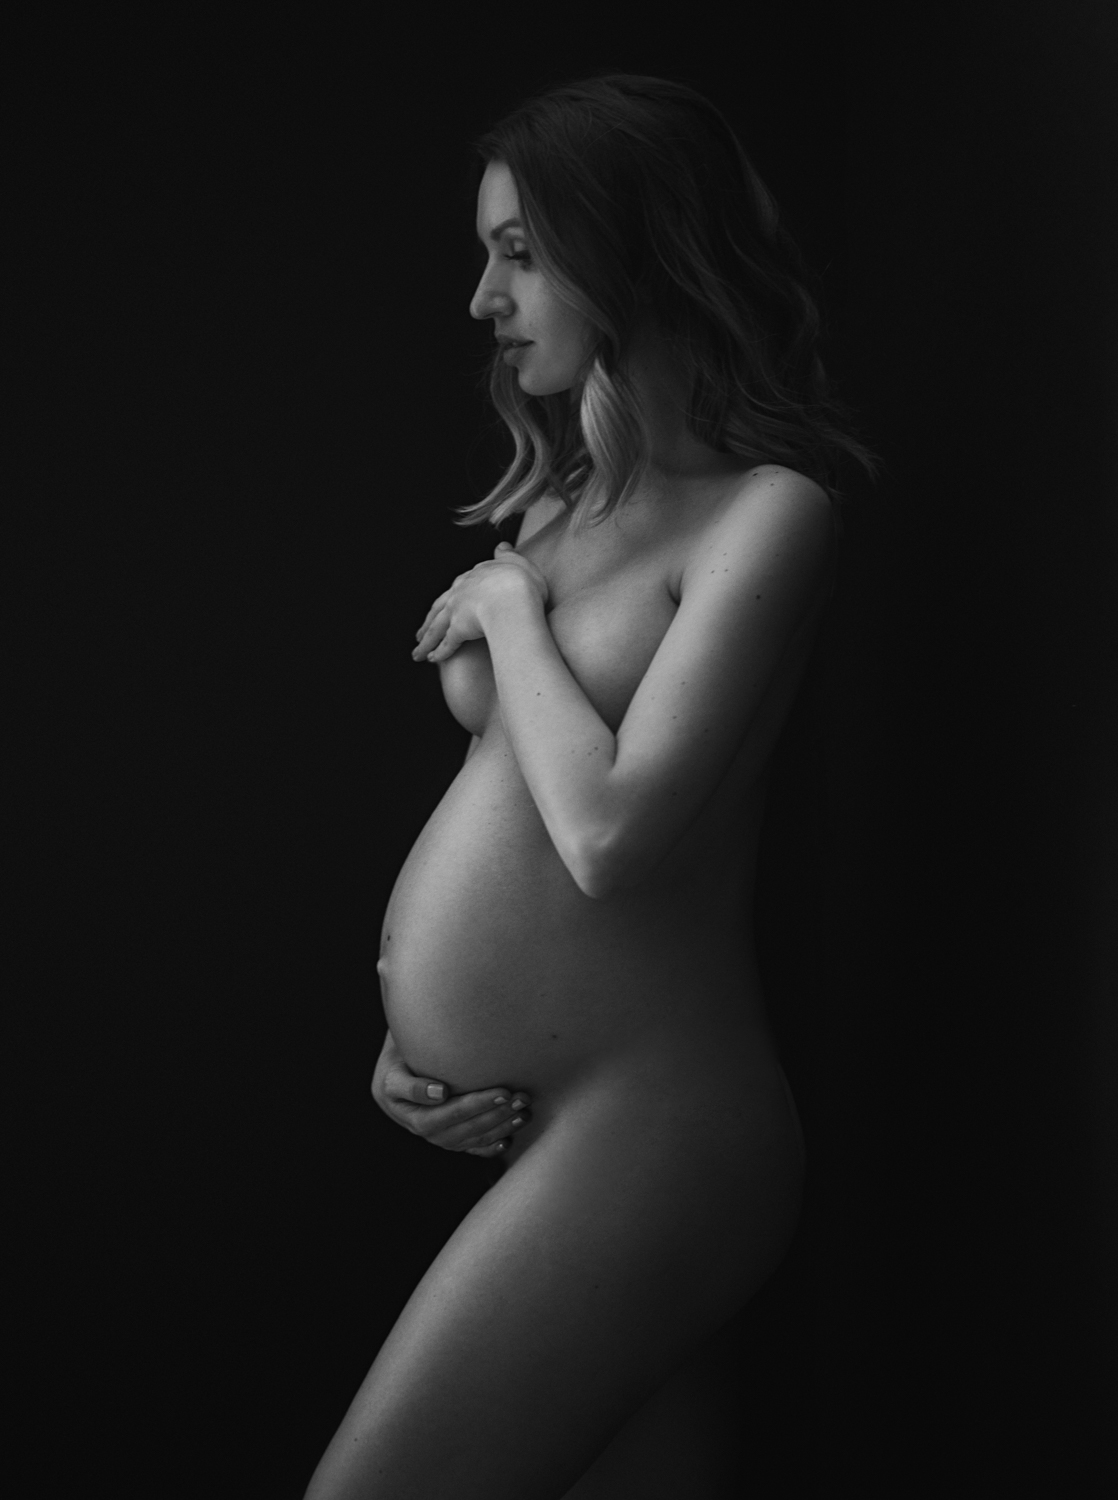 stunning pregnancy portraits by Lola Melani - celebrity maternity and newborn photographer in NYC